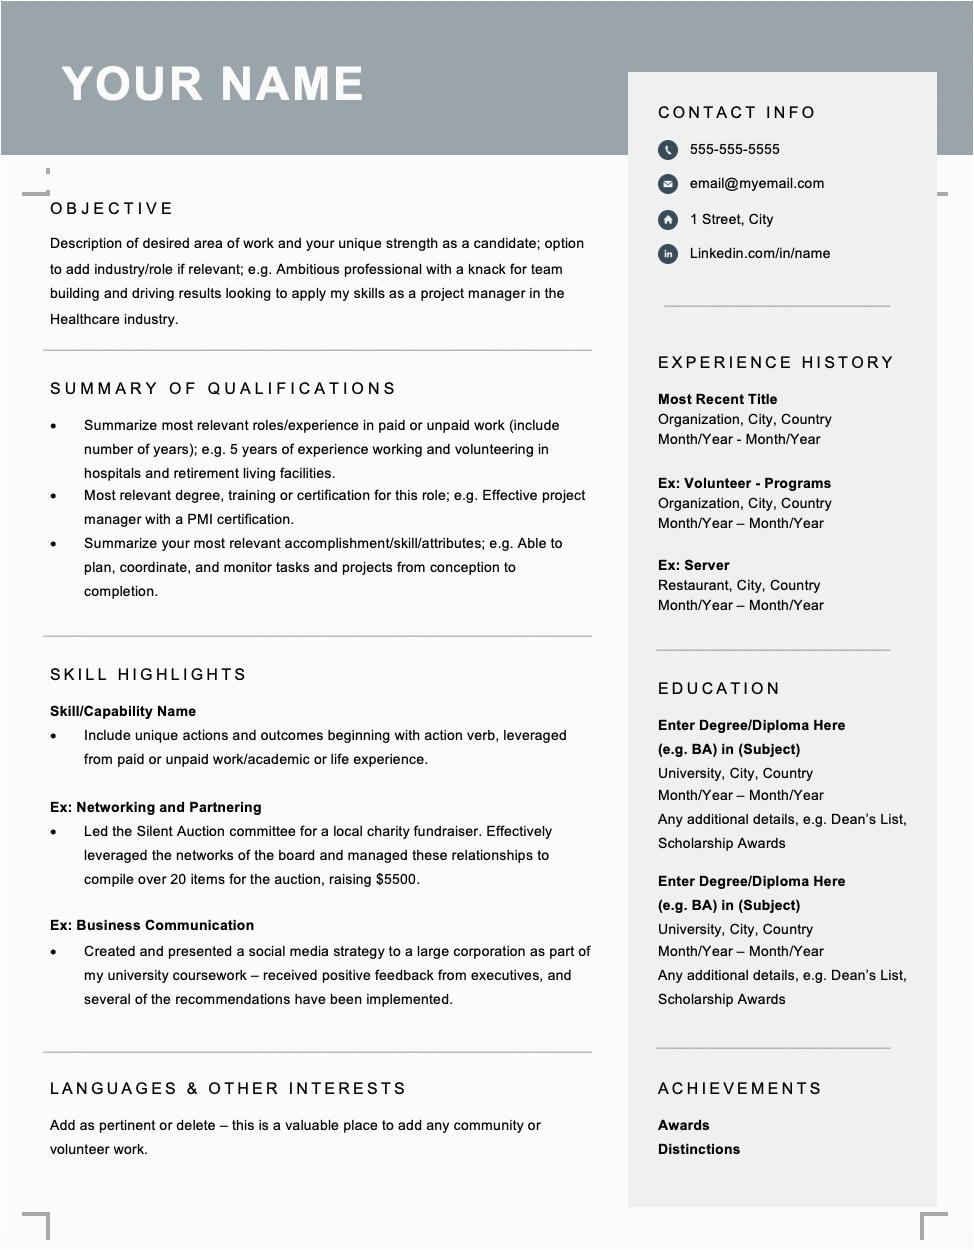 Sample Resumes for Jobs In Canada Canadian Resume & Cover Letter format Tips & Templates